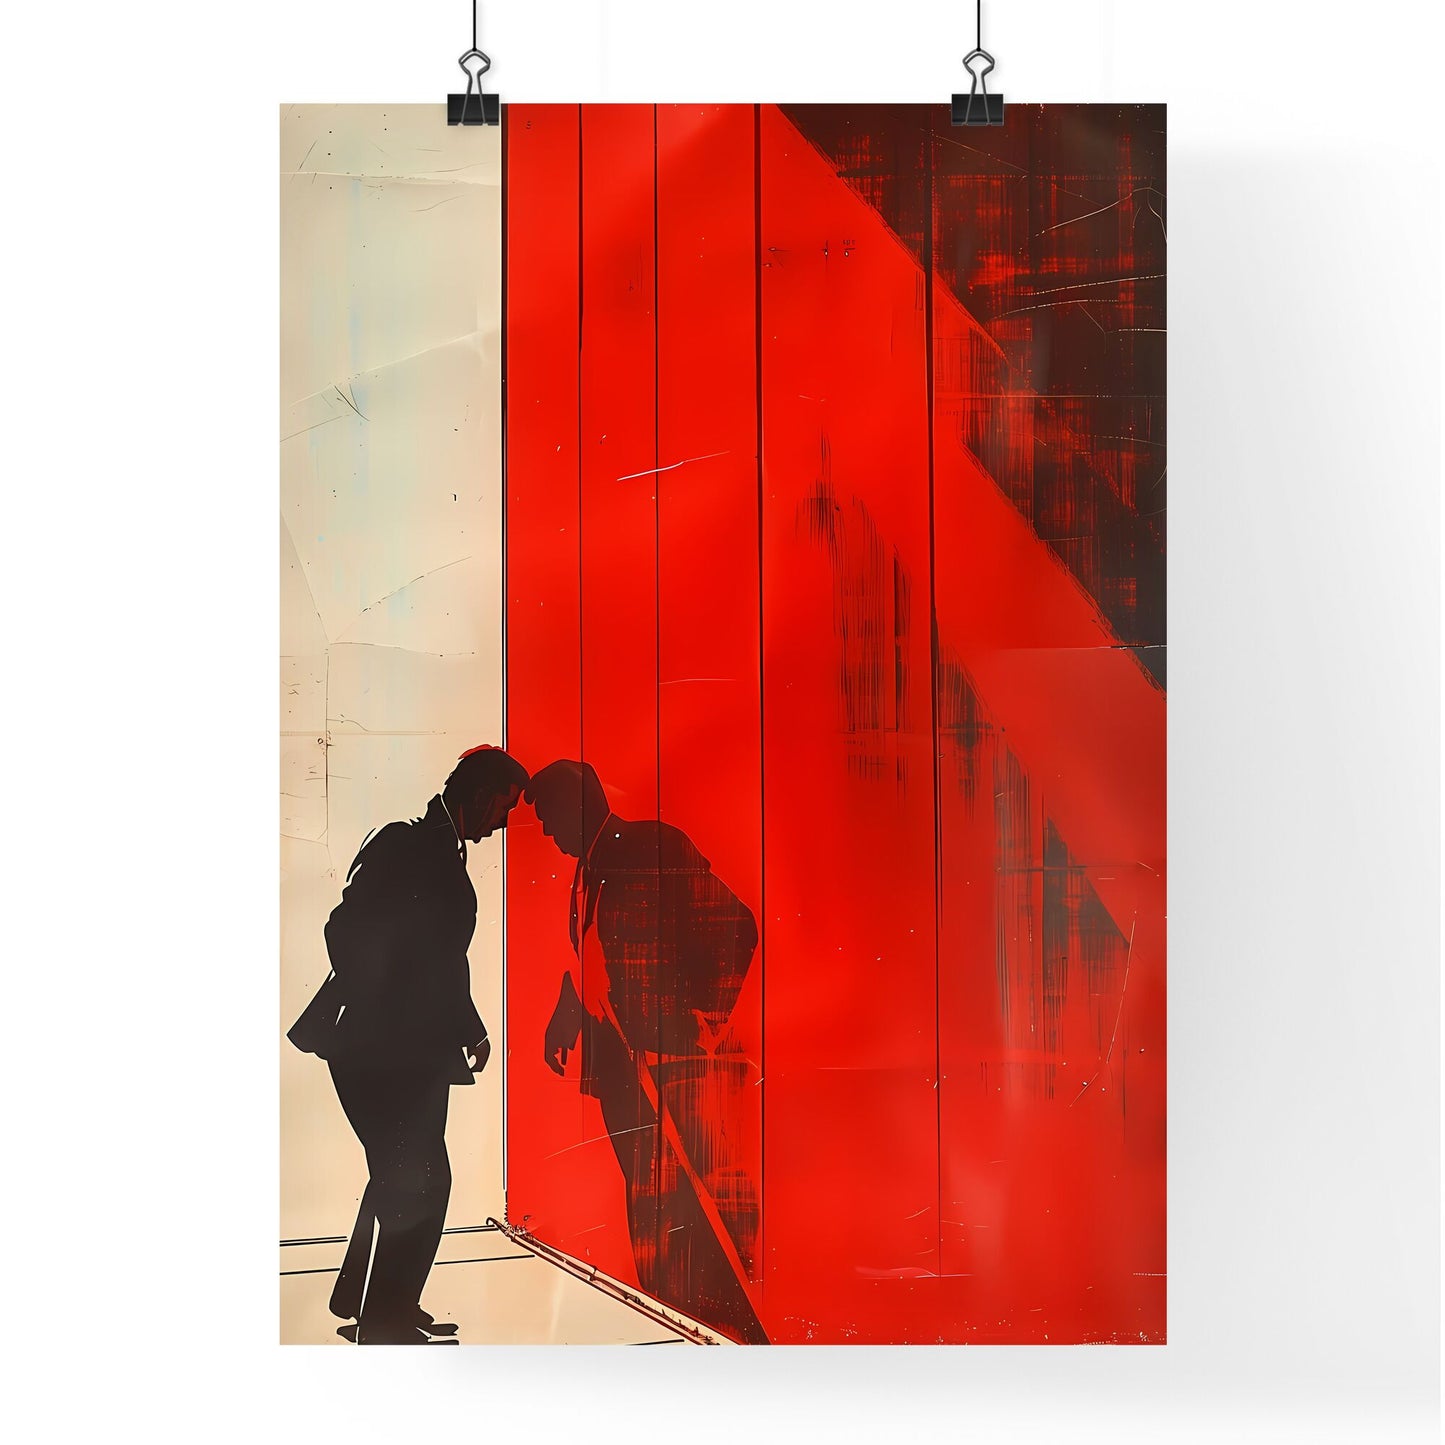 Vibrant Painting with Silhouette of Man and Woman, Propaganda-Style, Art Focus Default Title